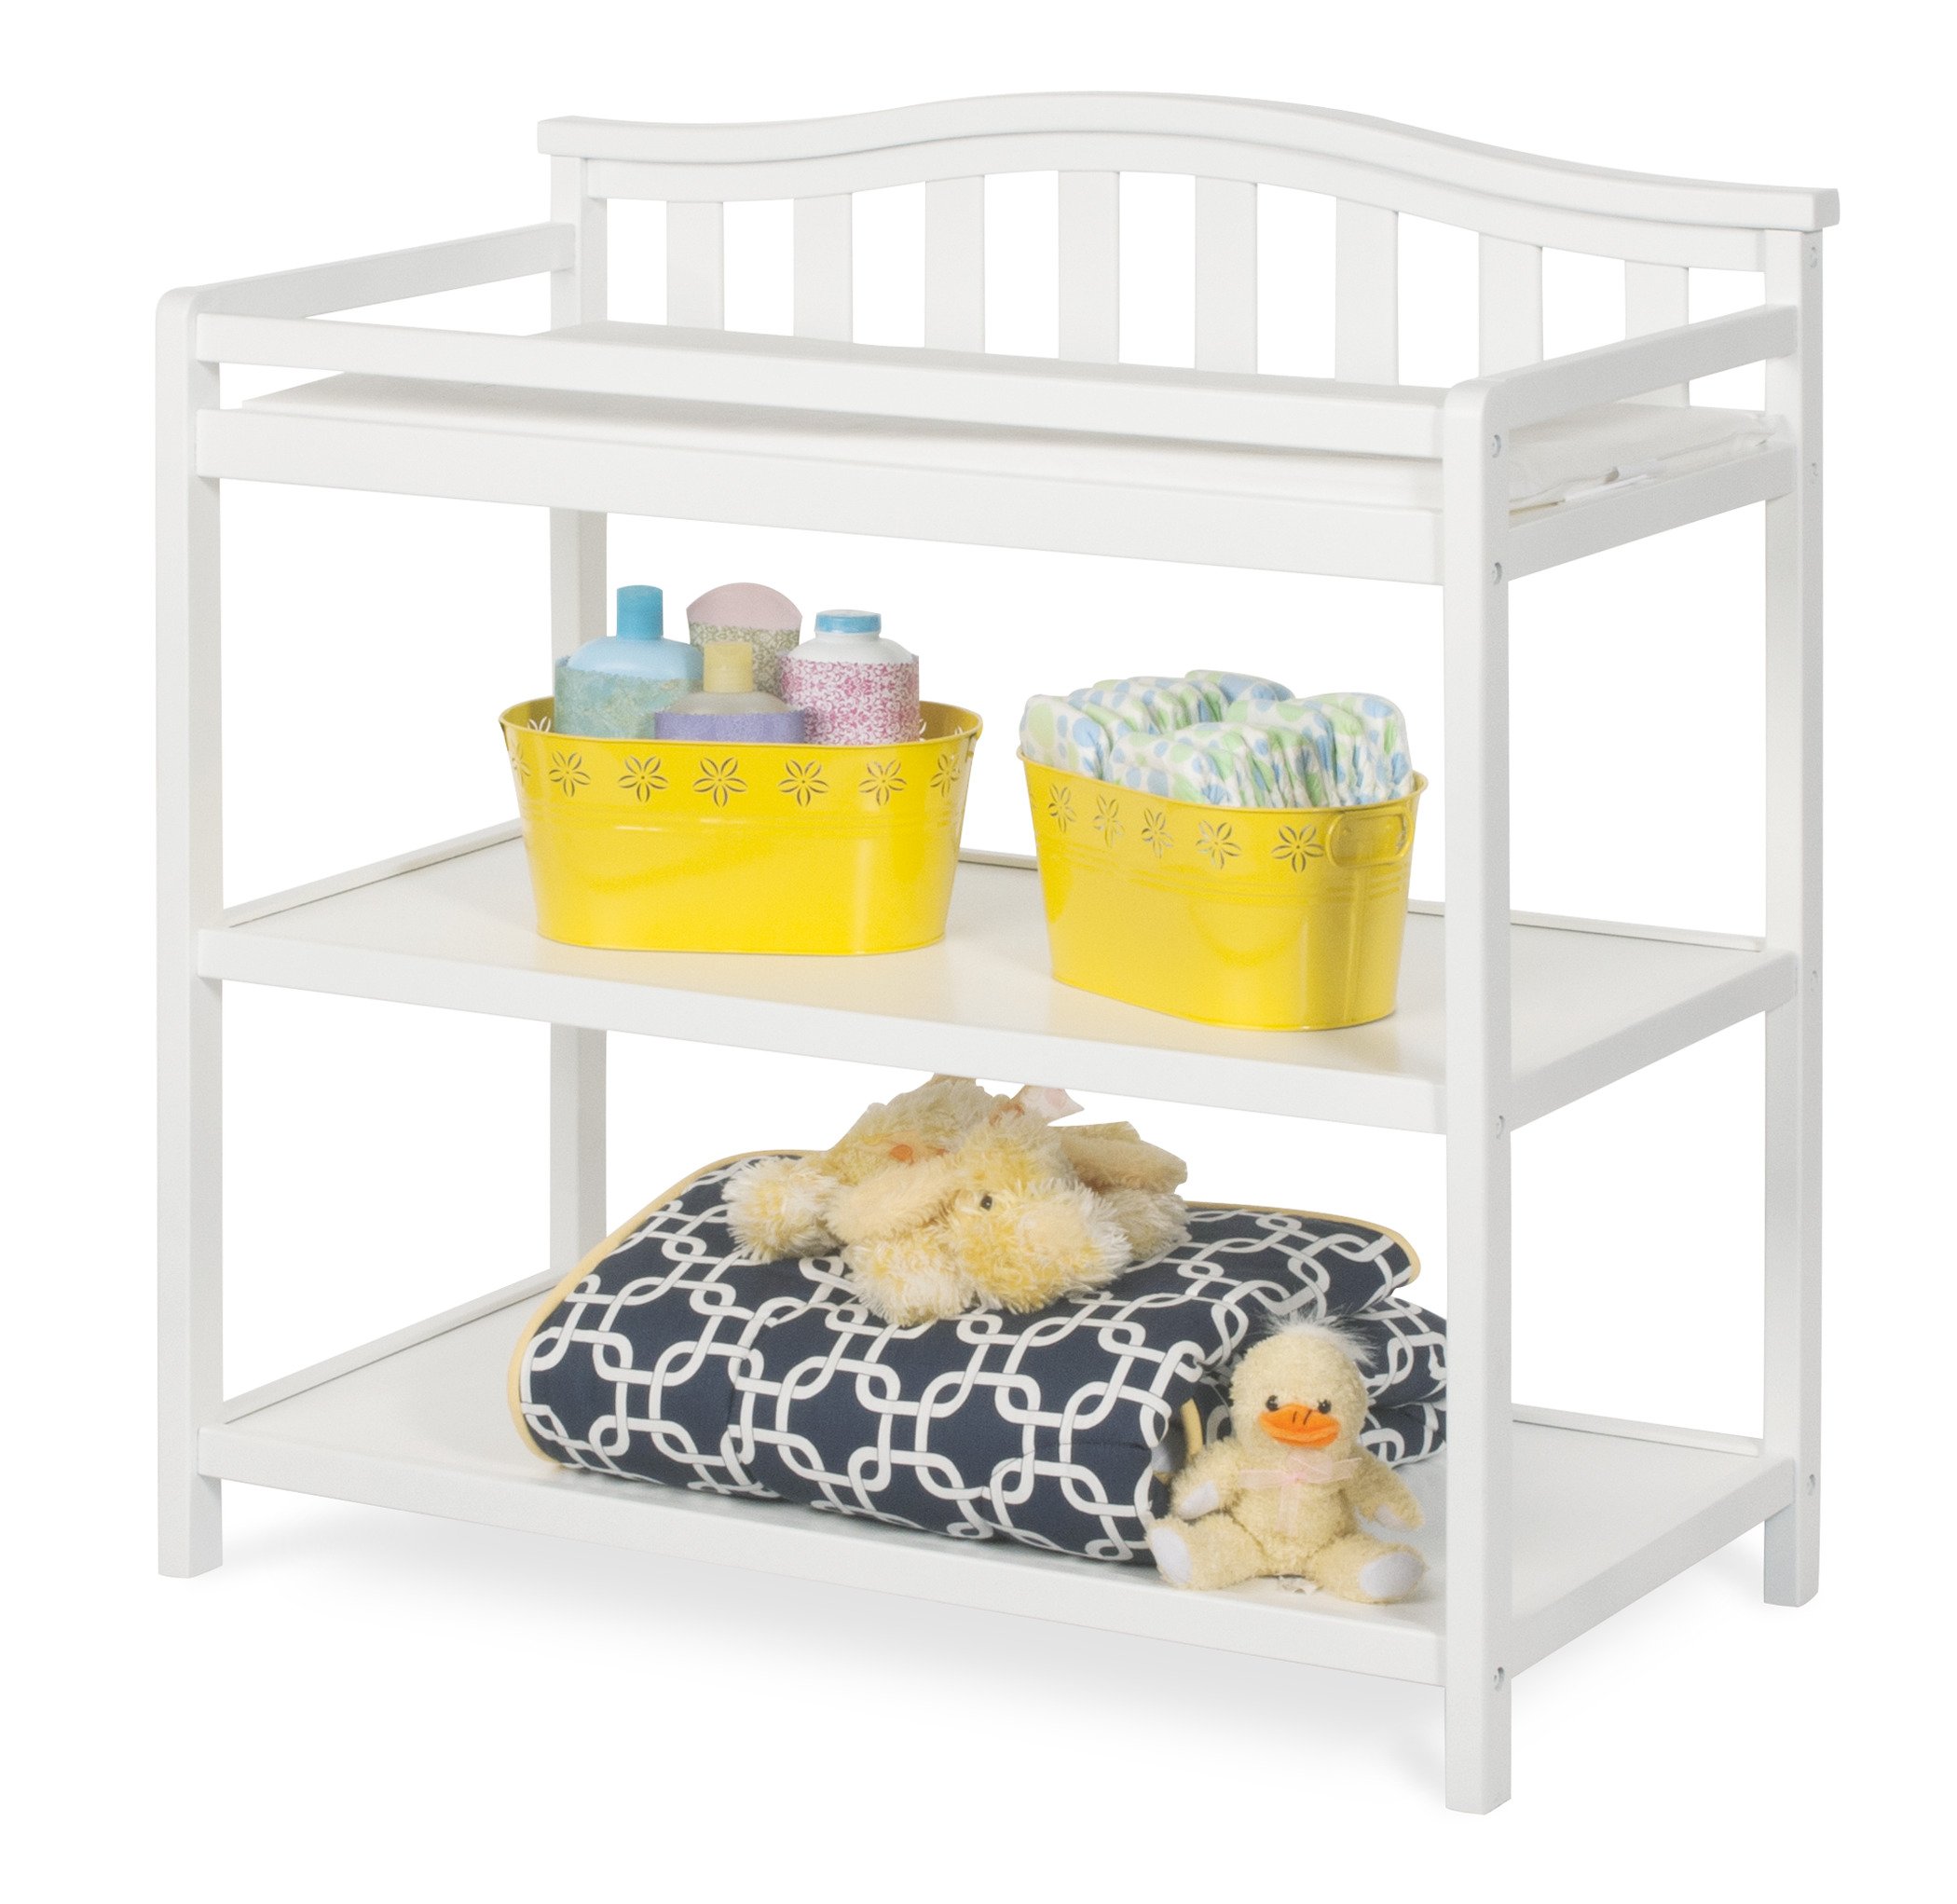 Foundations Child Craft Infant Changing Table with Arch Top Back, Water-Resistant Pad and Safety Strap, Matte White